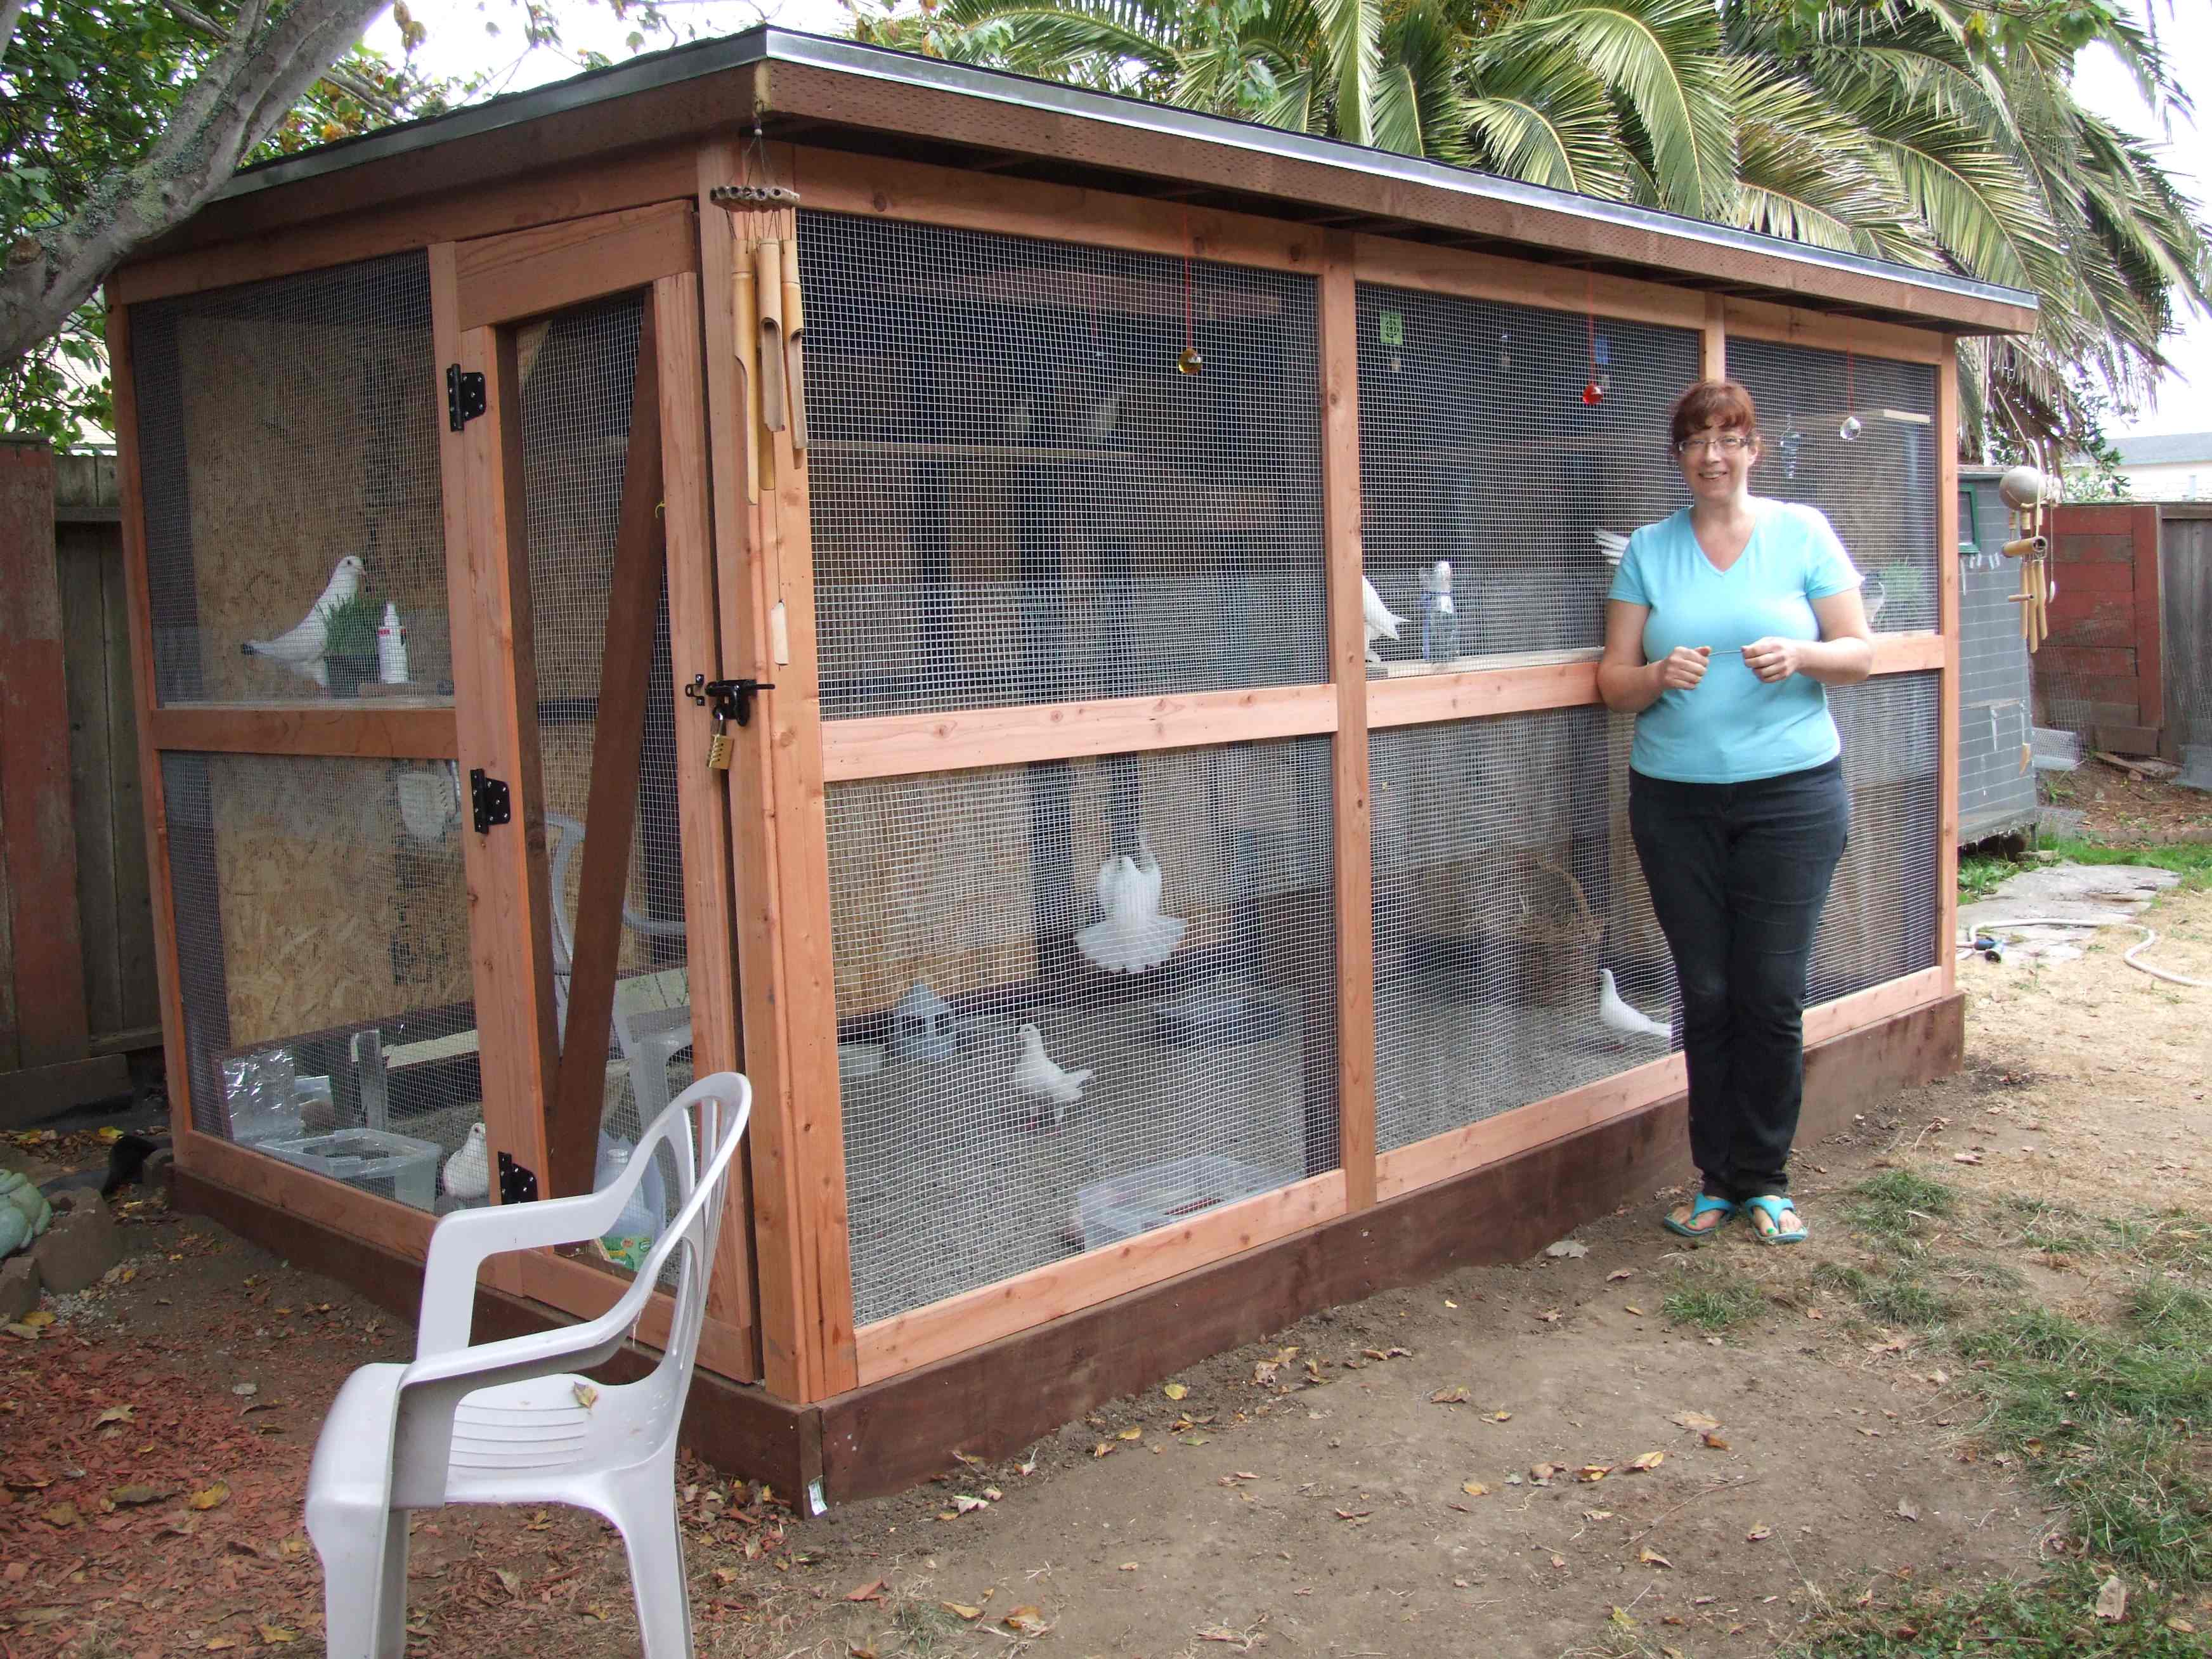 How to Create an Aviary for Rescued Pigeons or Doves